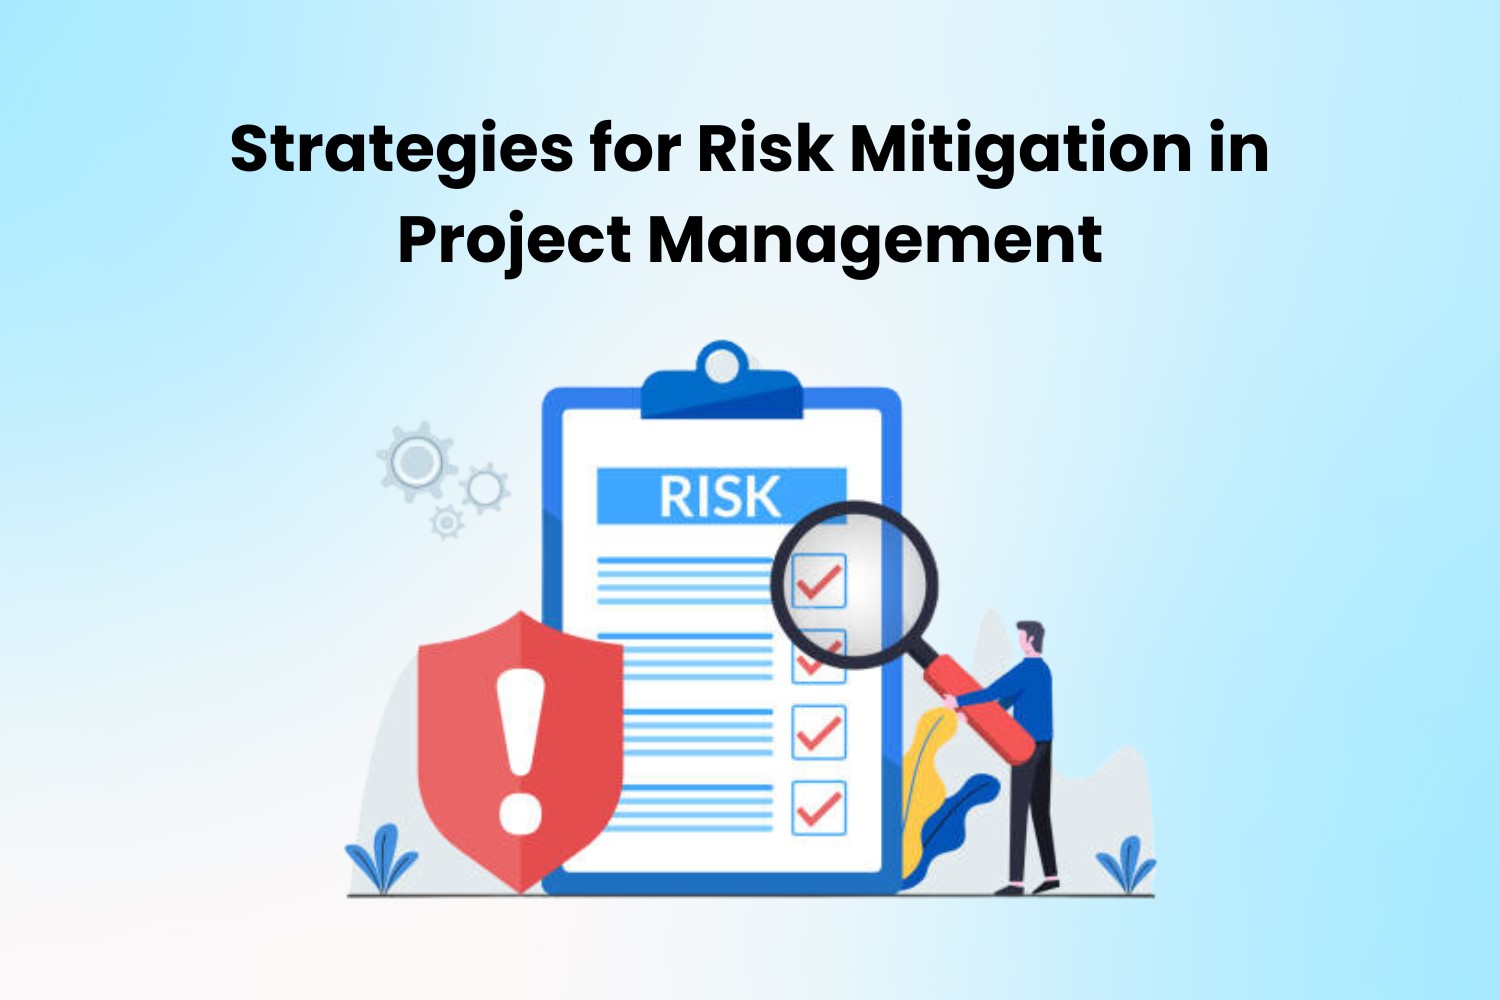 Strategies for Risk Mitigation in Project Management